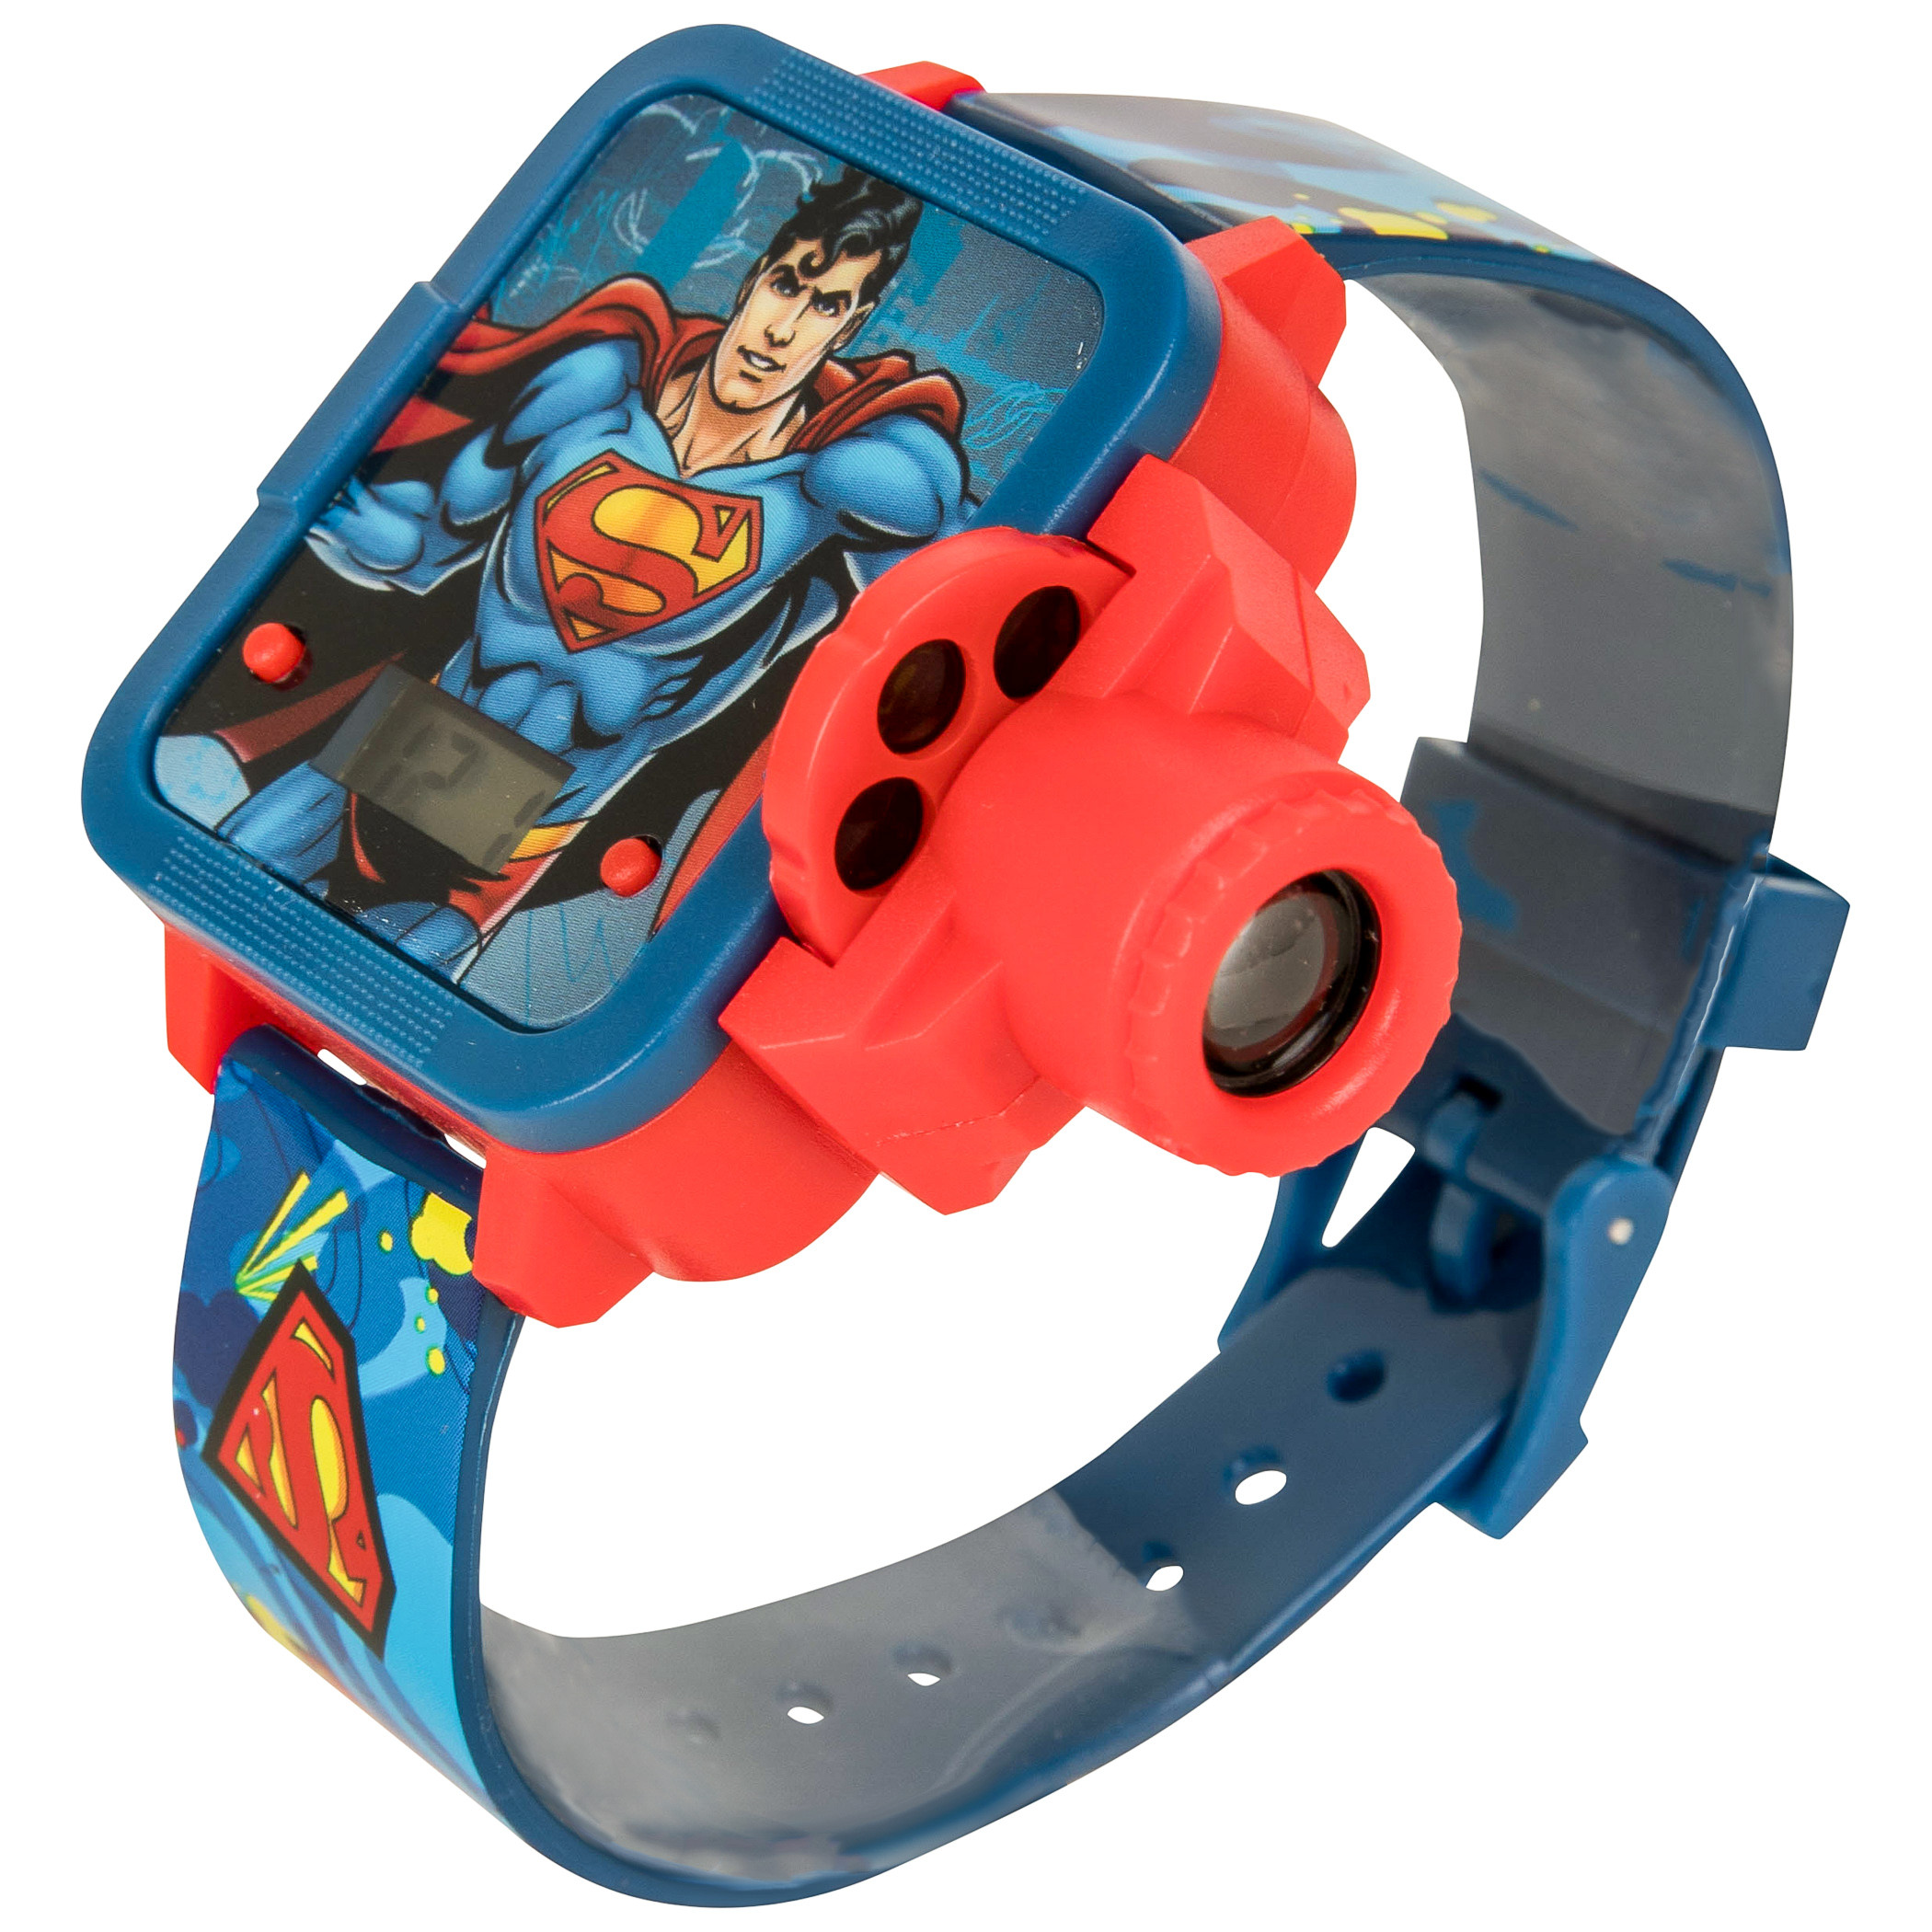 Superman Kid's Projected Images LCD Watch